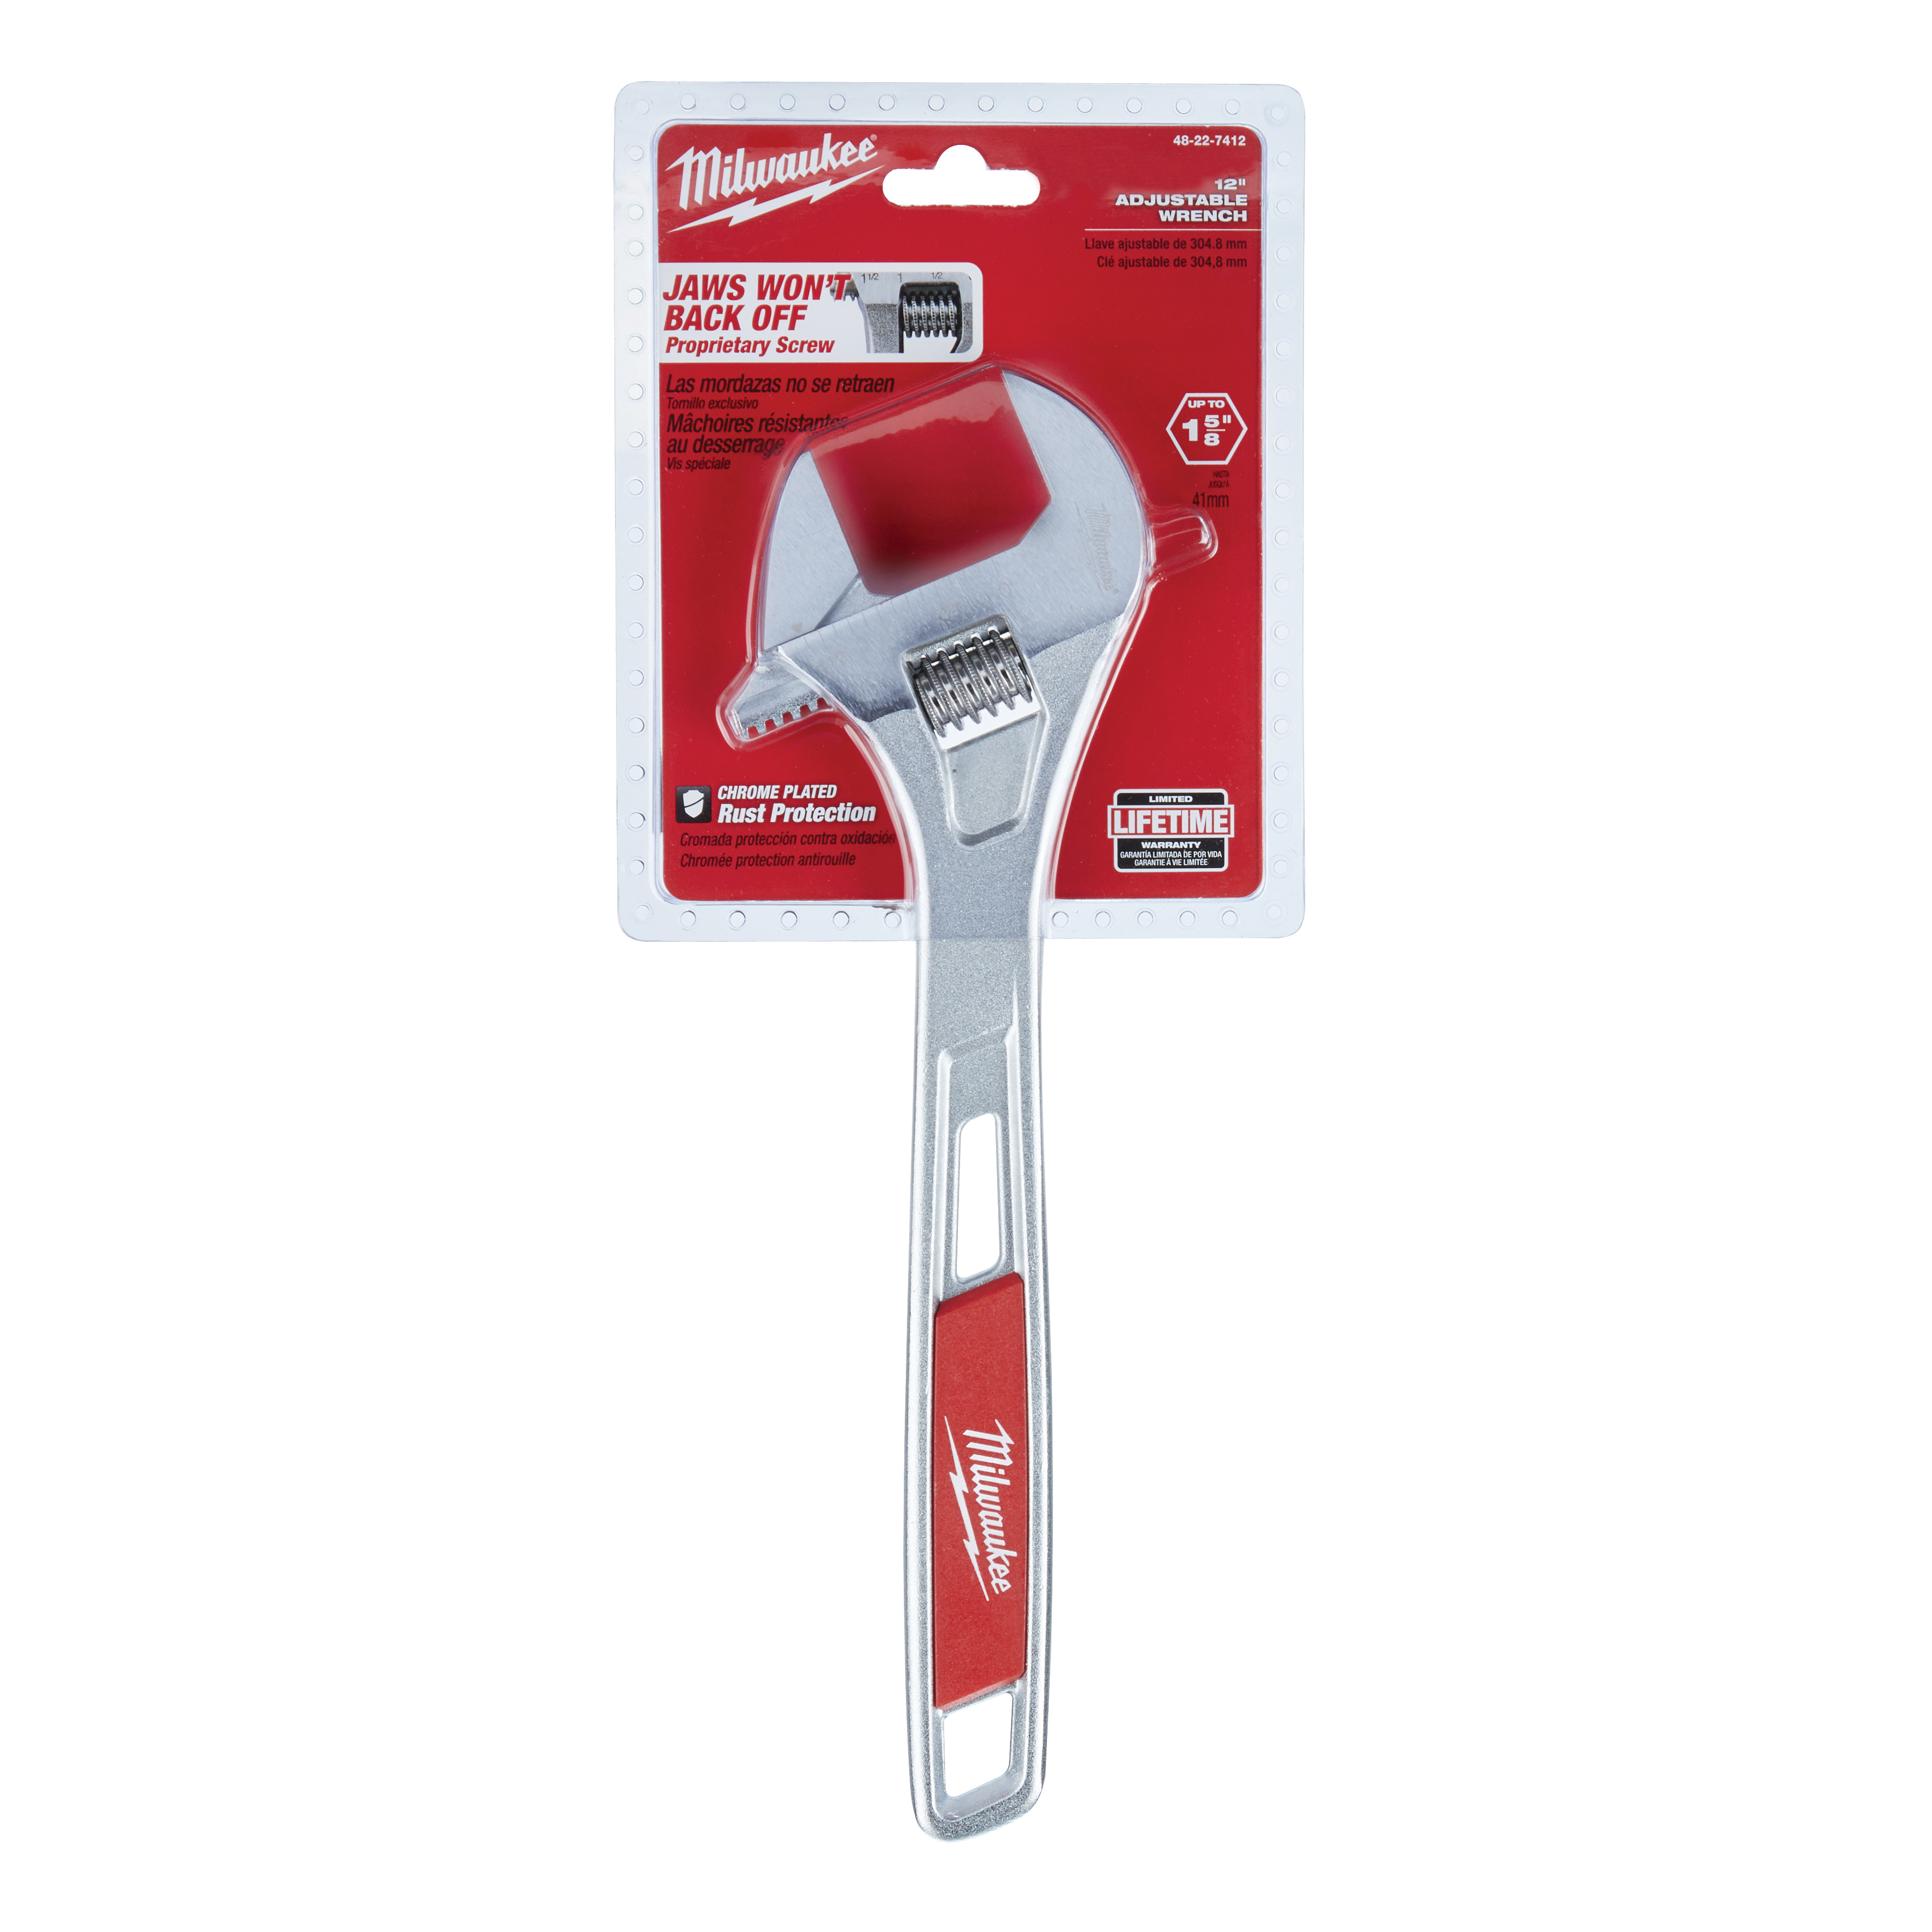 48-22-7412 Adjustable Wrench, 12 in OAL, 1-5/8 in Jaw, Steel, Chrome, Ergonomic Handle